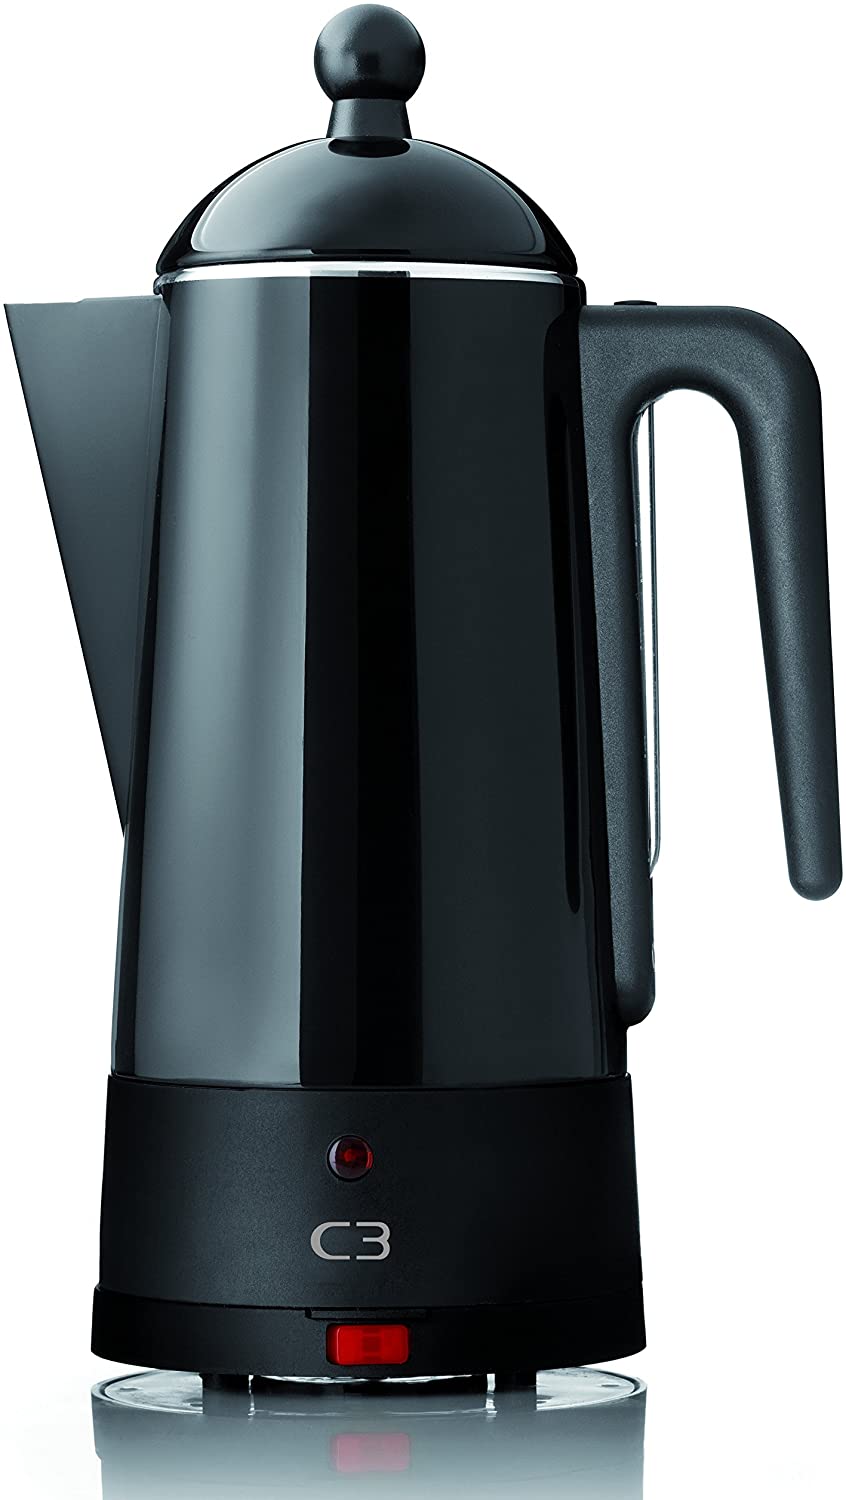 C3 30-30254 Design Percolator eco 2 - 6 Cups, Varnished Stainless Steel, Black